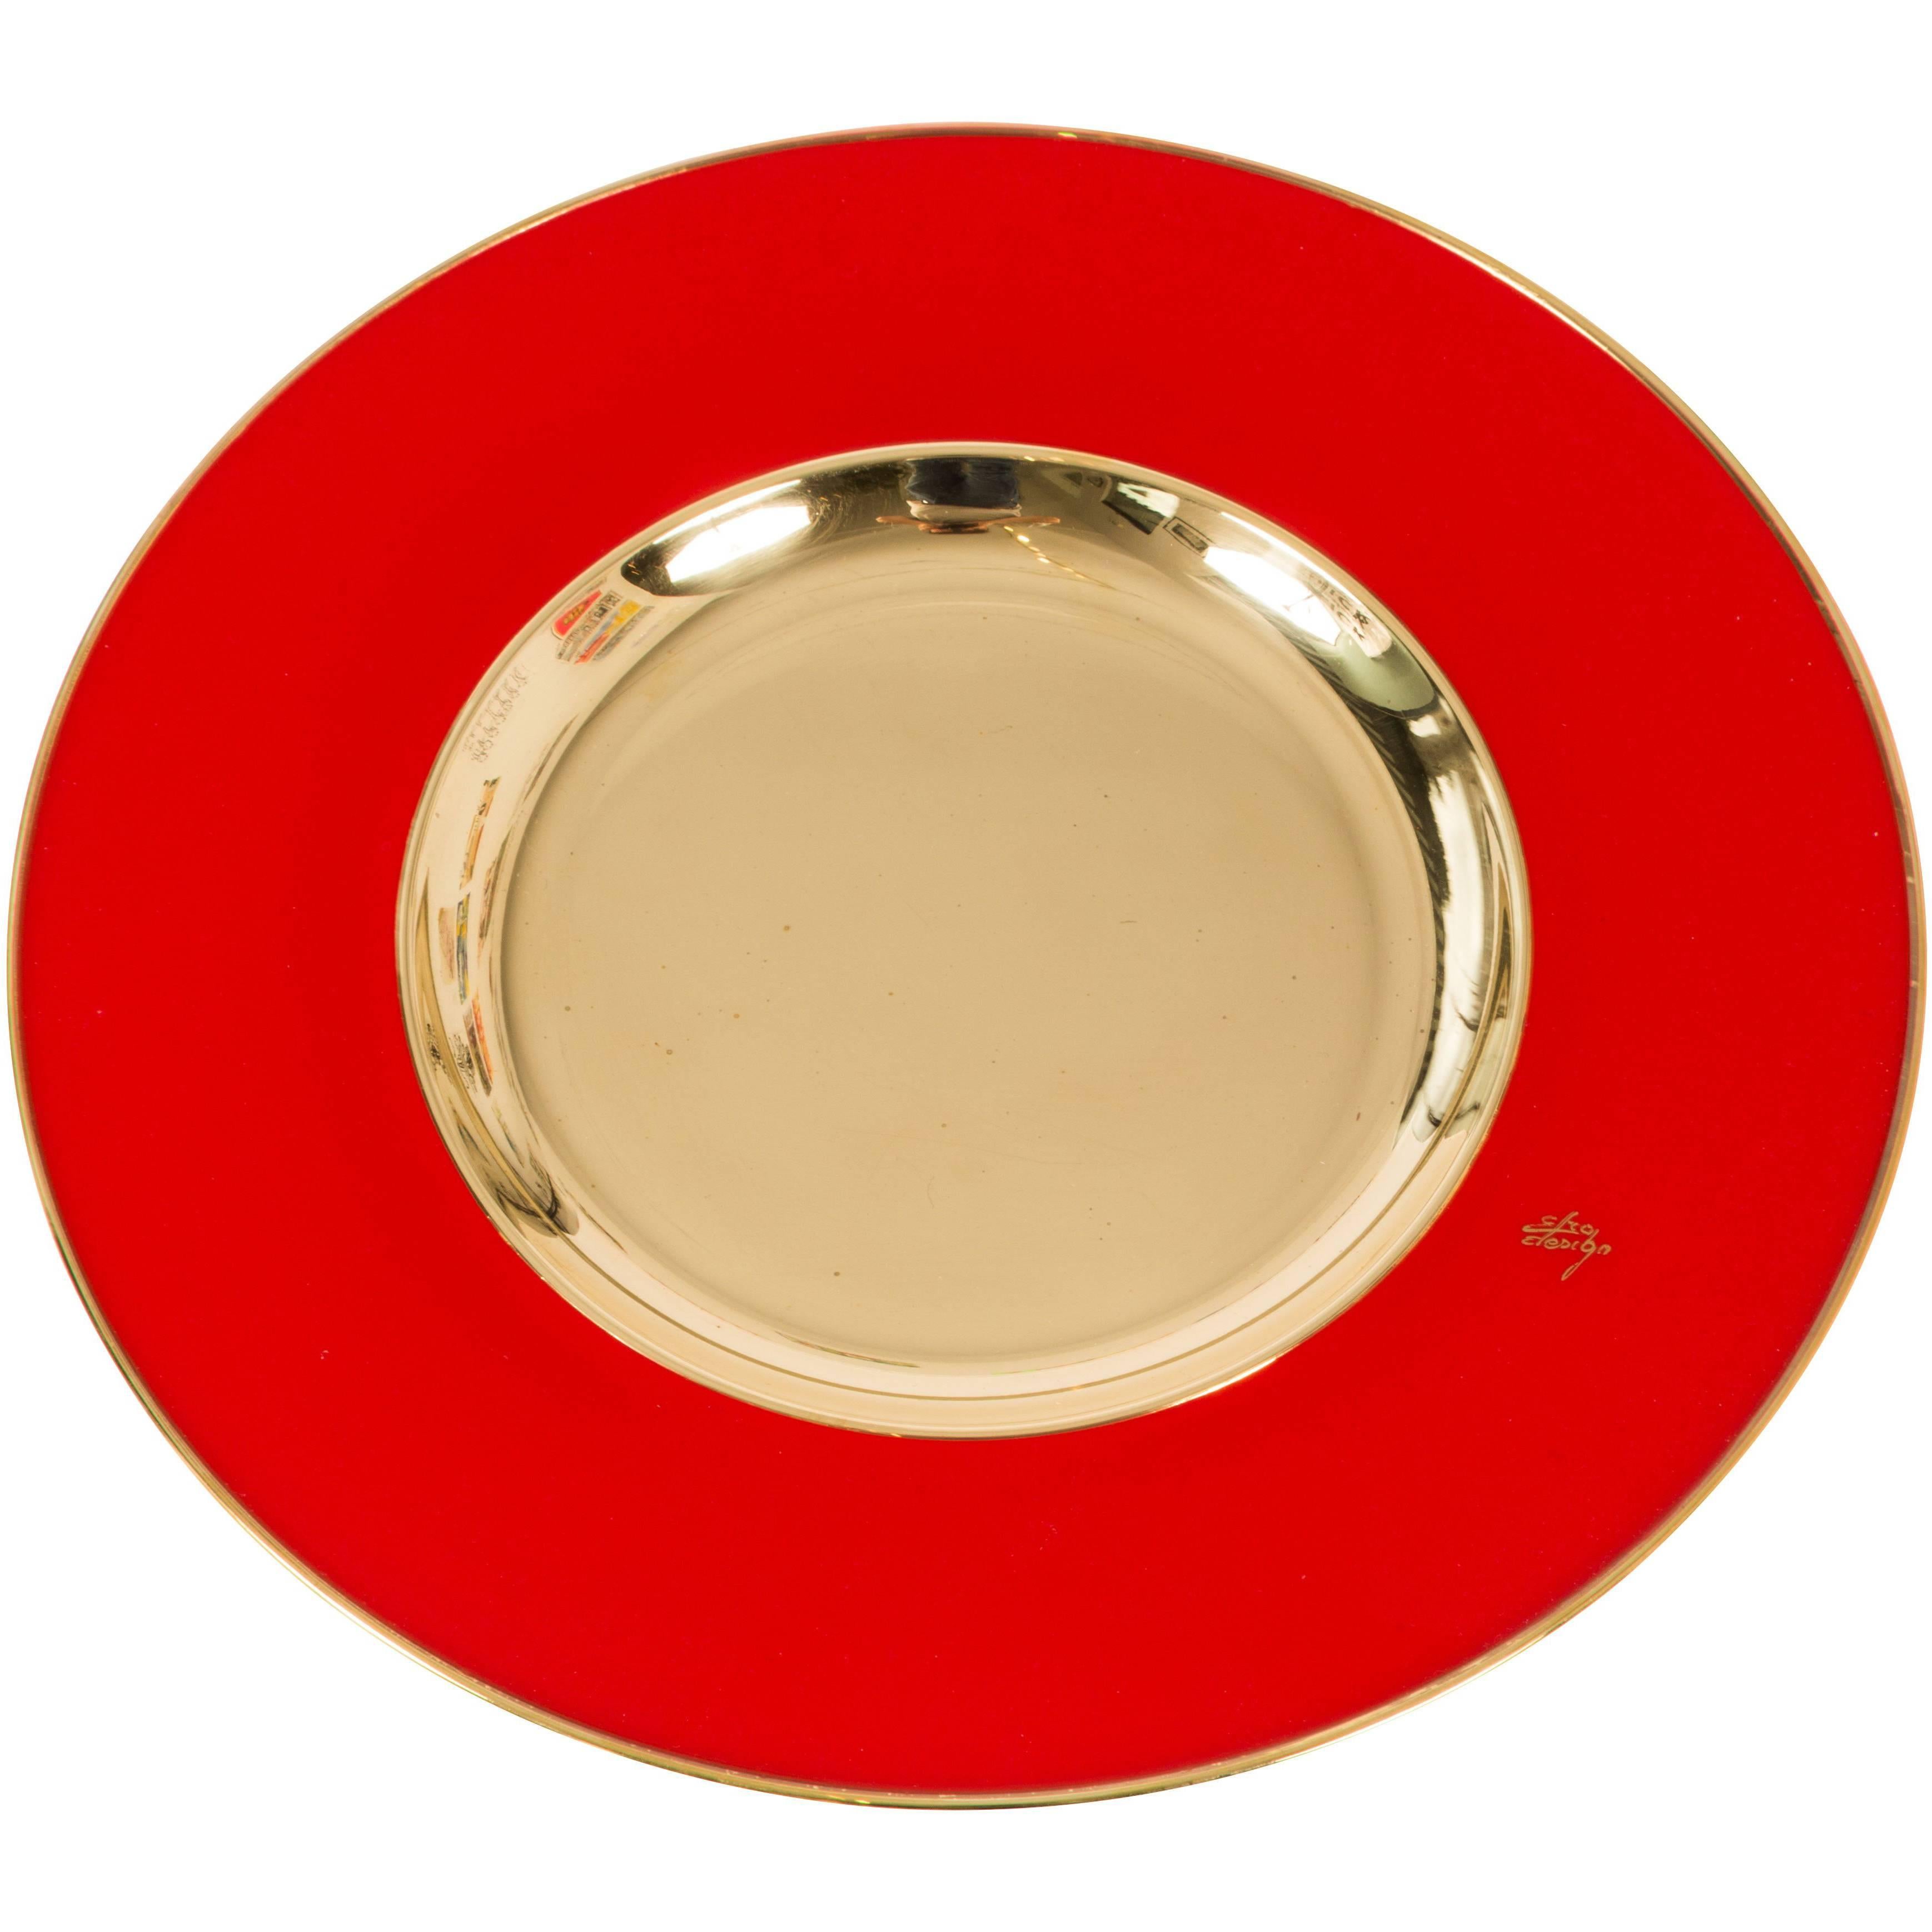 Chic Chargers in Brilliant Red and Brass by Etro Design